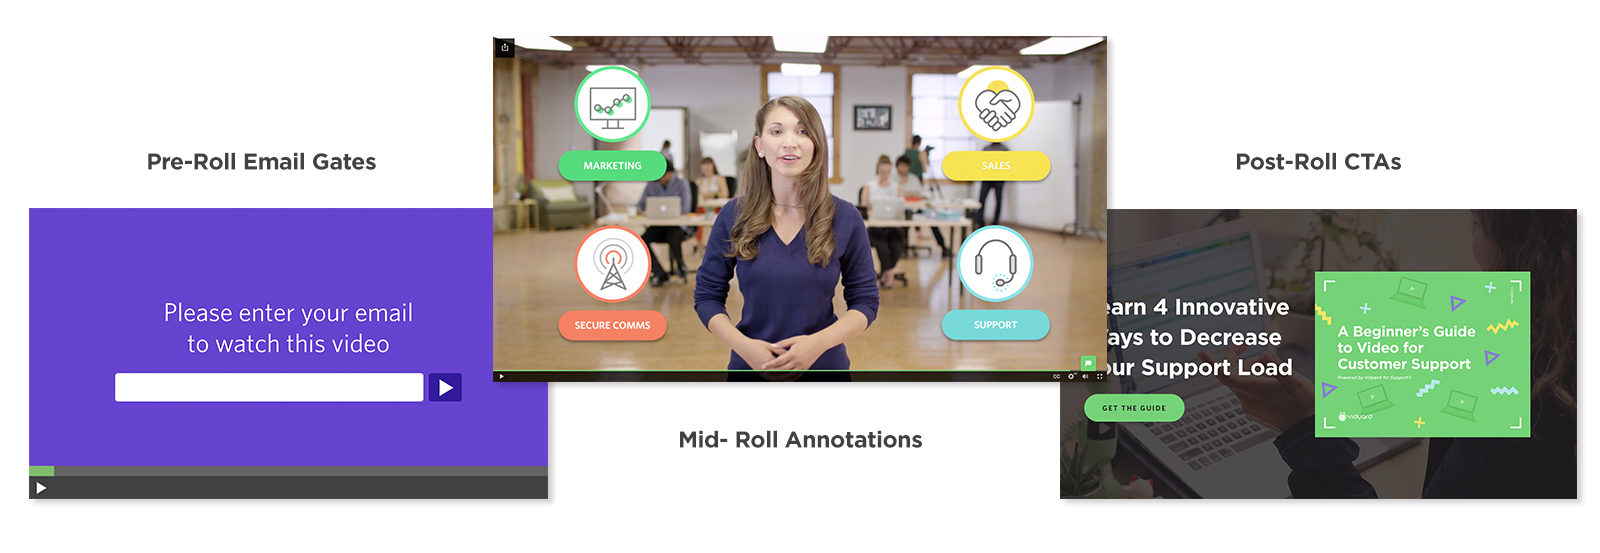 Interactive video elements can include pre-roll email gates, mid-roll annotations, or post-roll CTAs